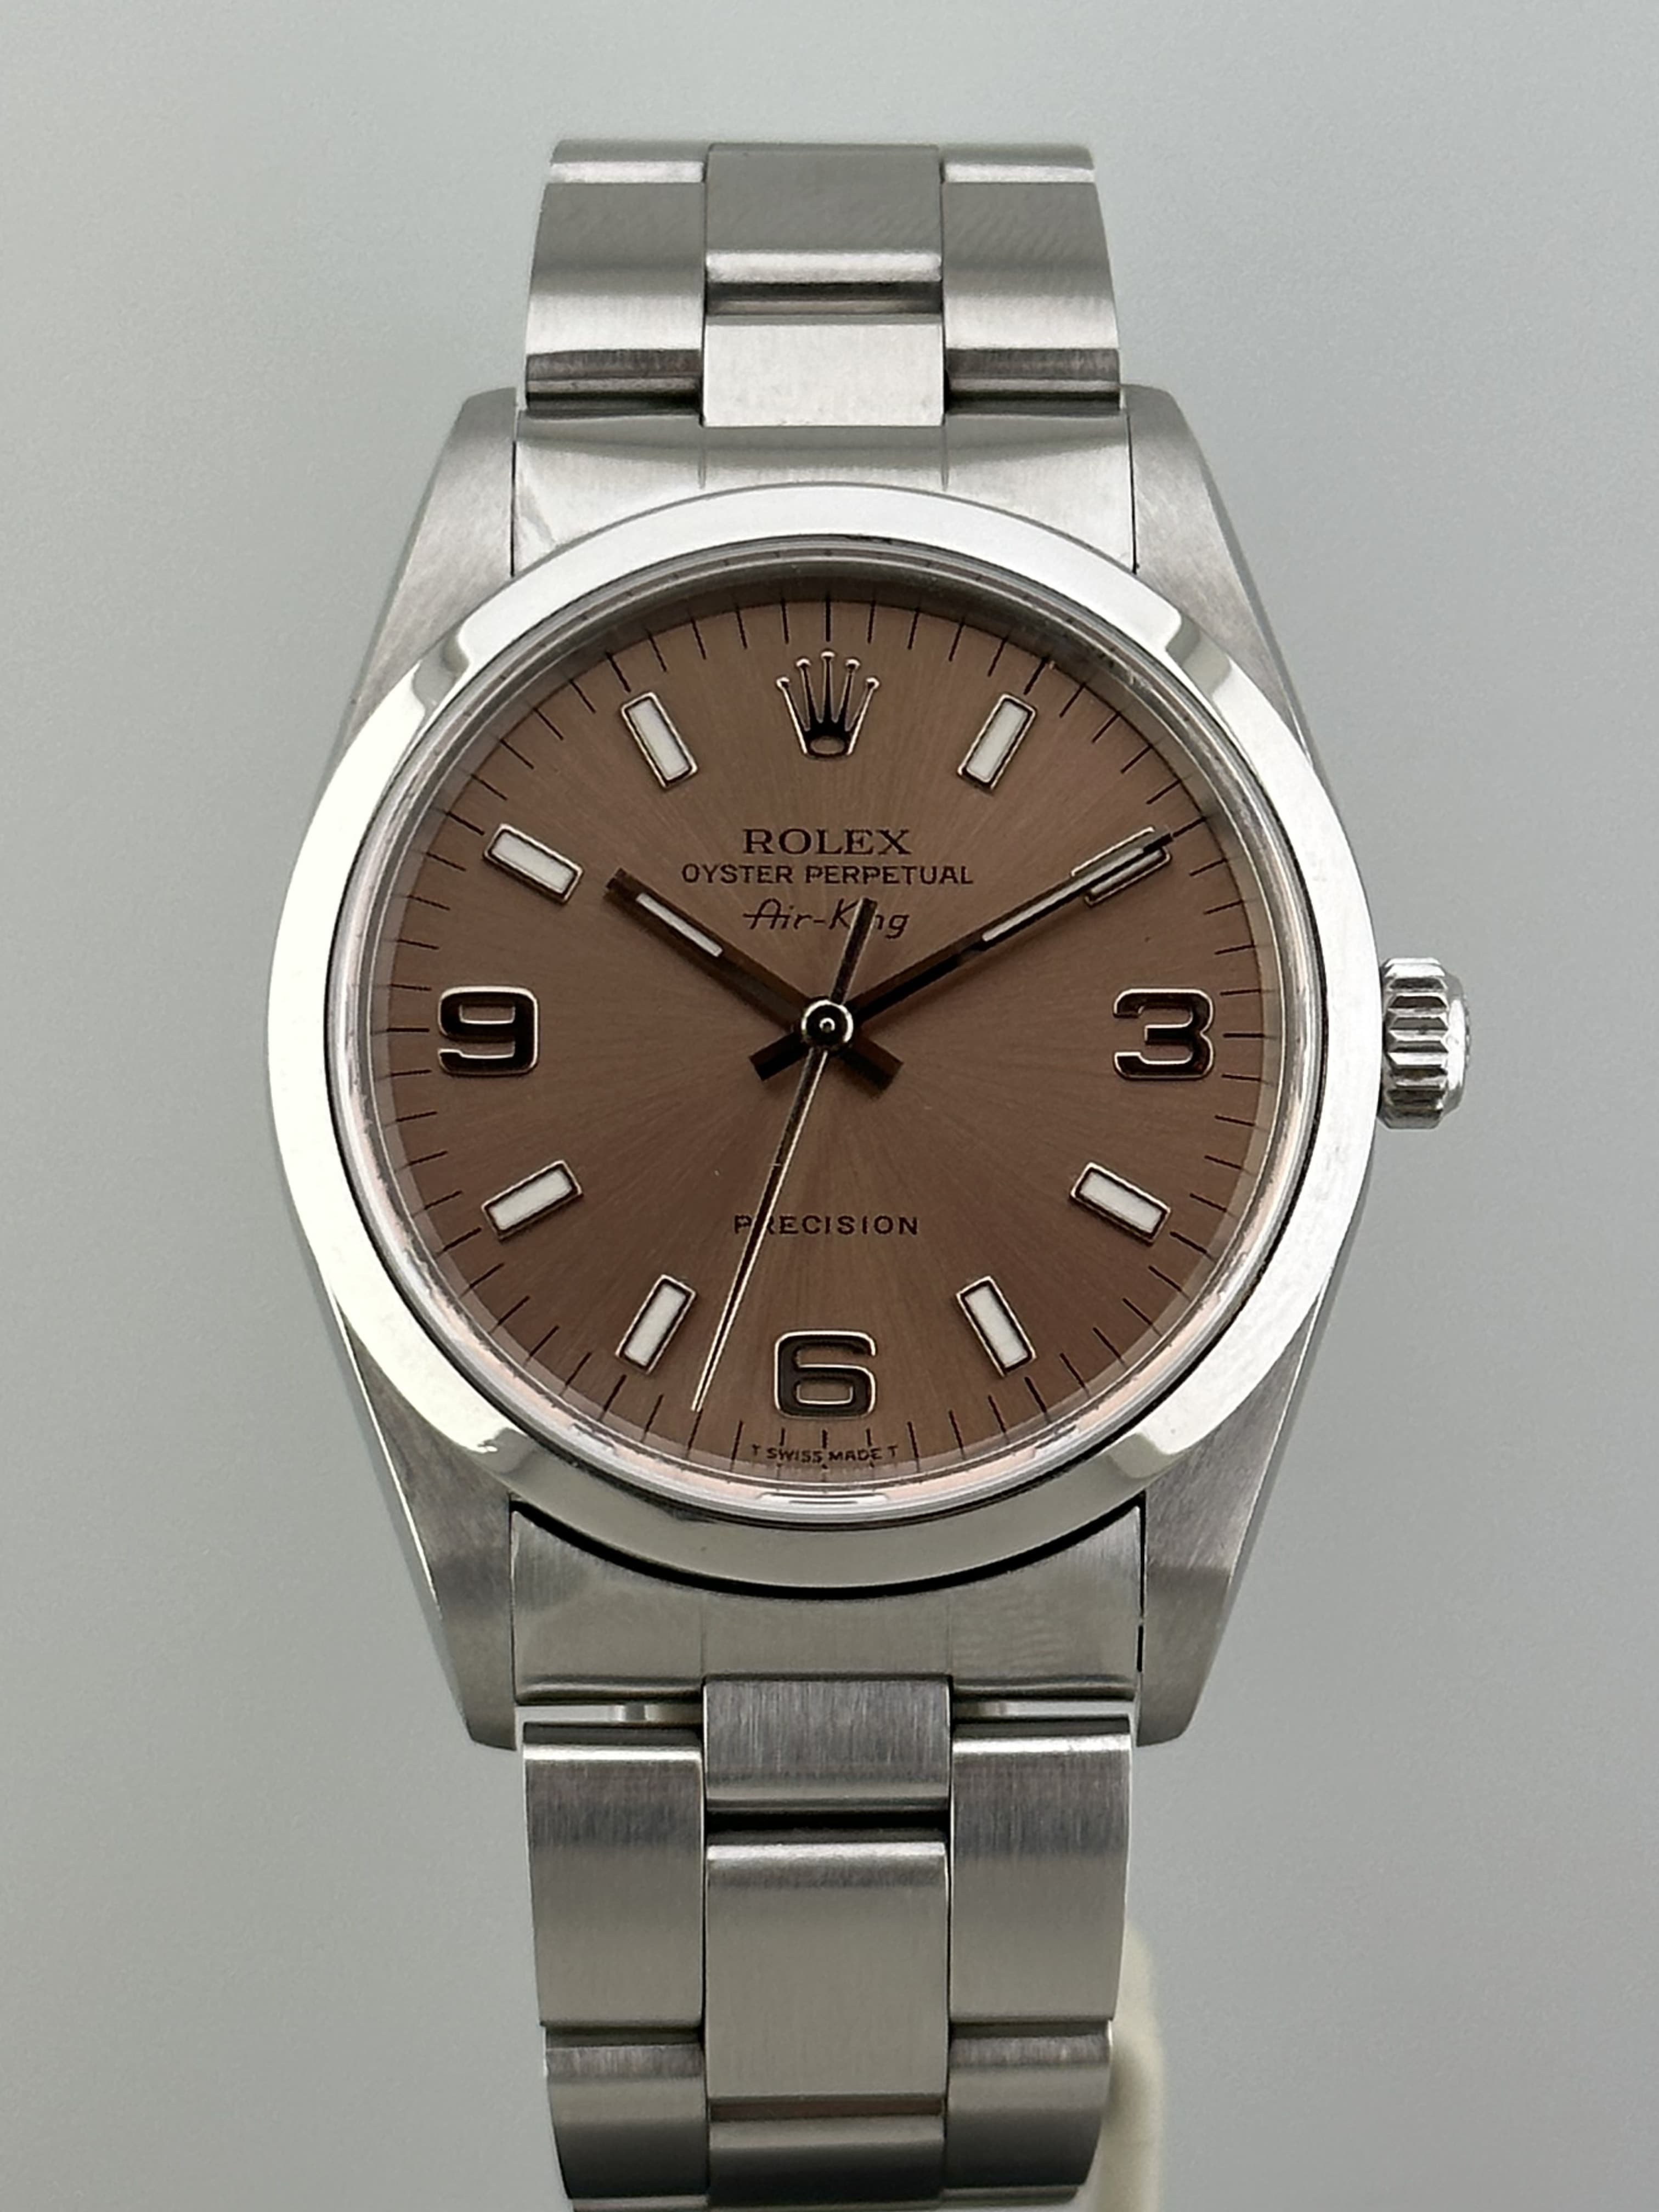 Rolex Air king ref: 14000 | Foto frontale